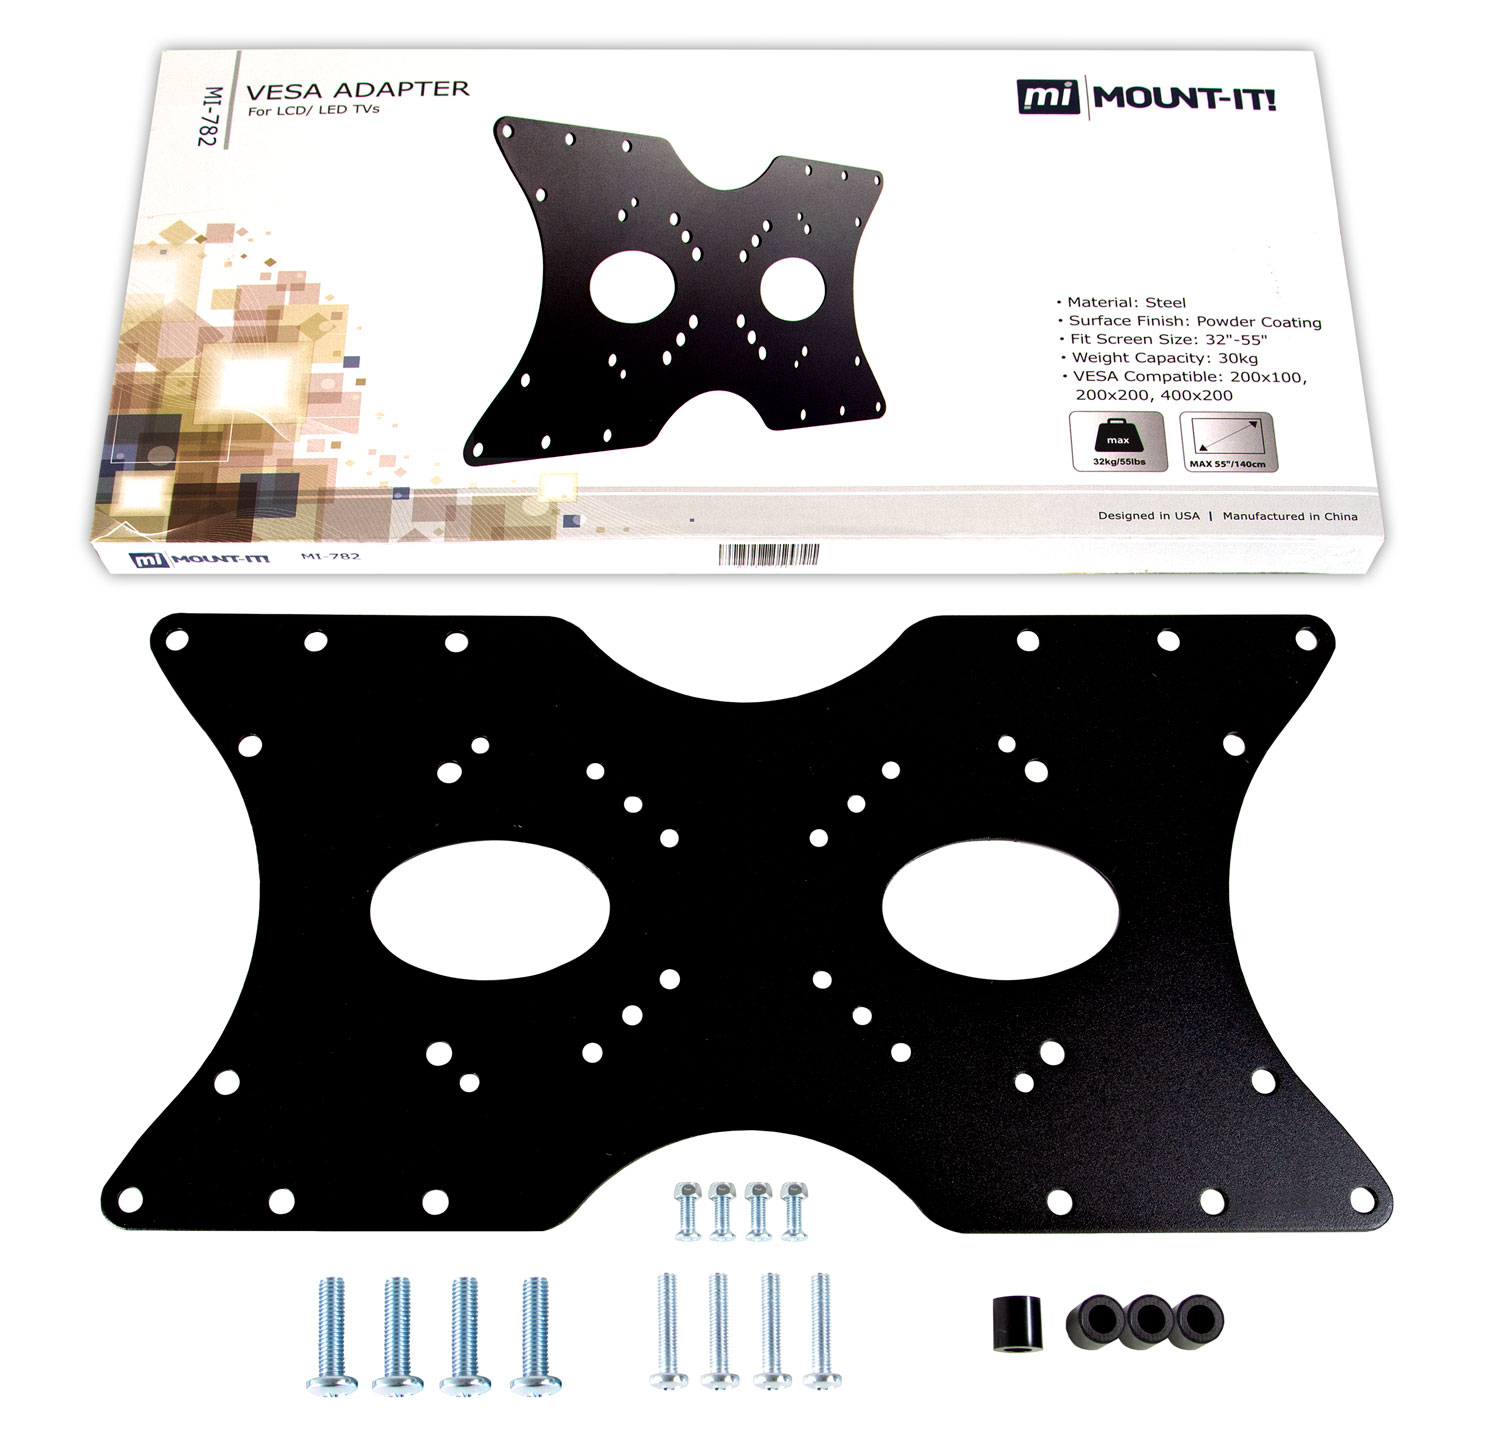 Mount-It! VESA Mount Adapter Plate | Conversion Kit Allows 75x75, 100x100, 200x200 to Fit Up to 400x200 mm Patterns - image 4 of 7